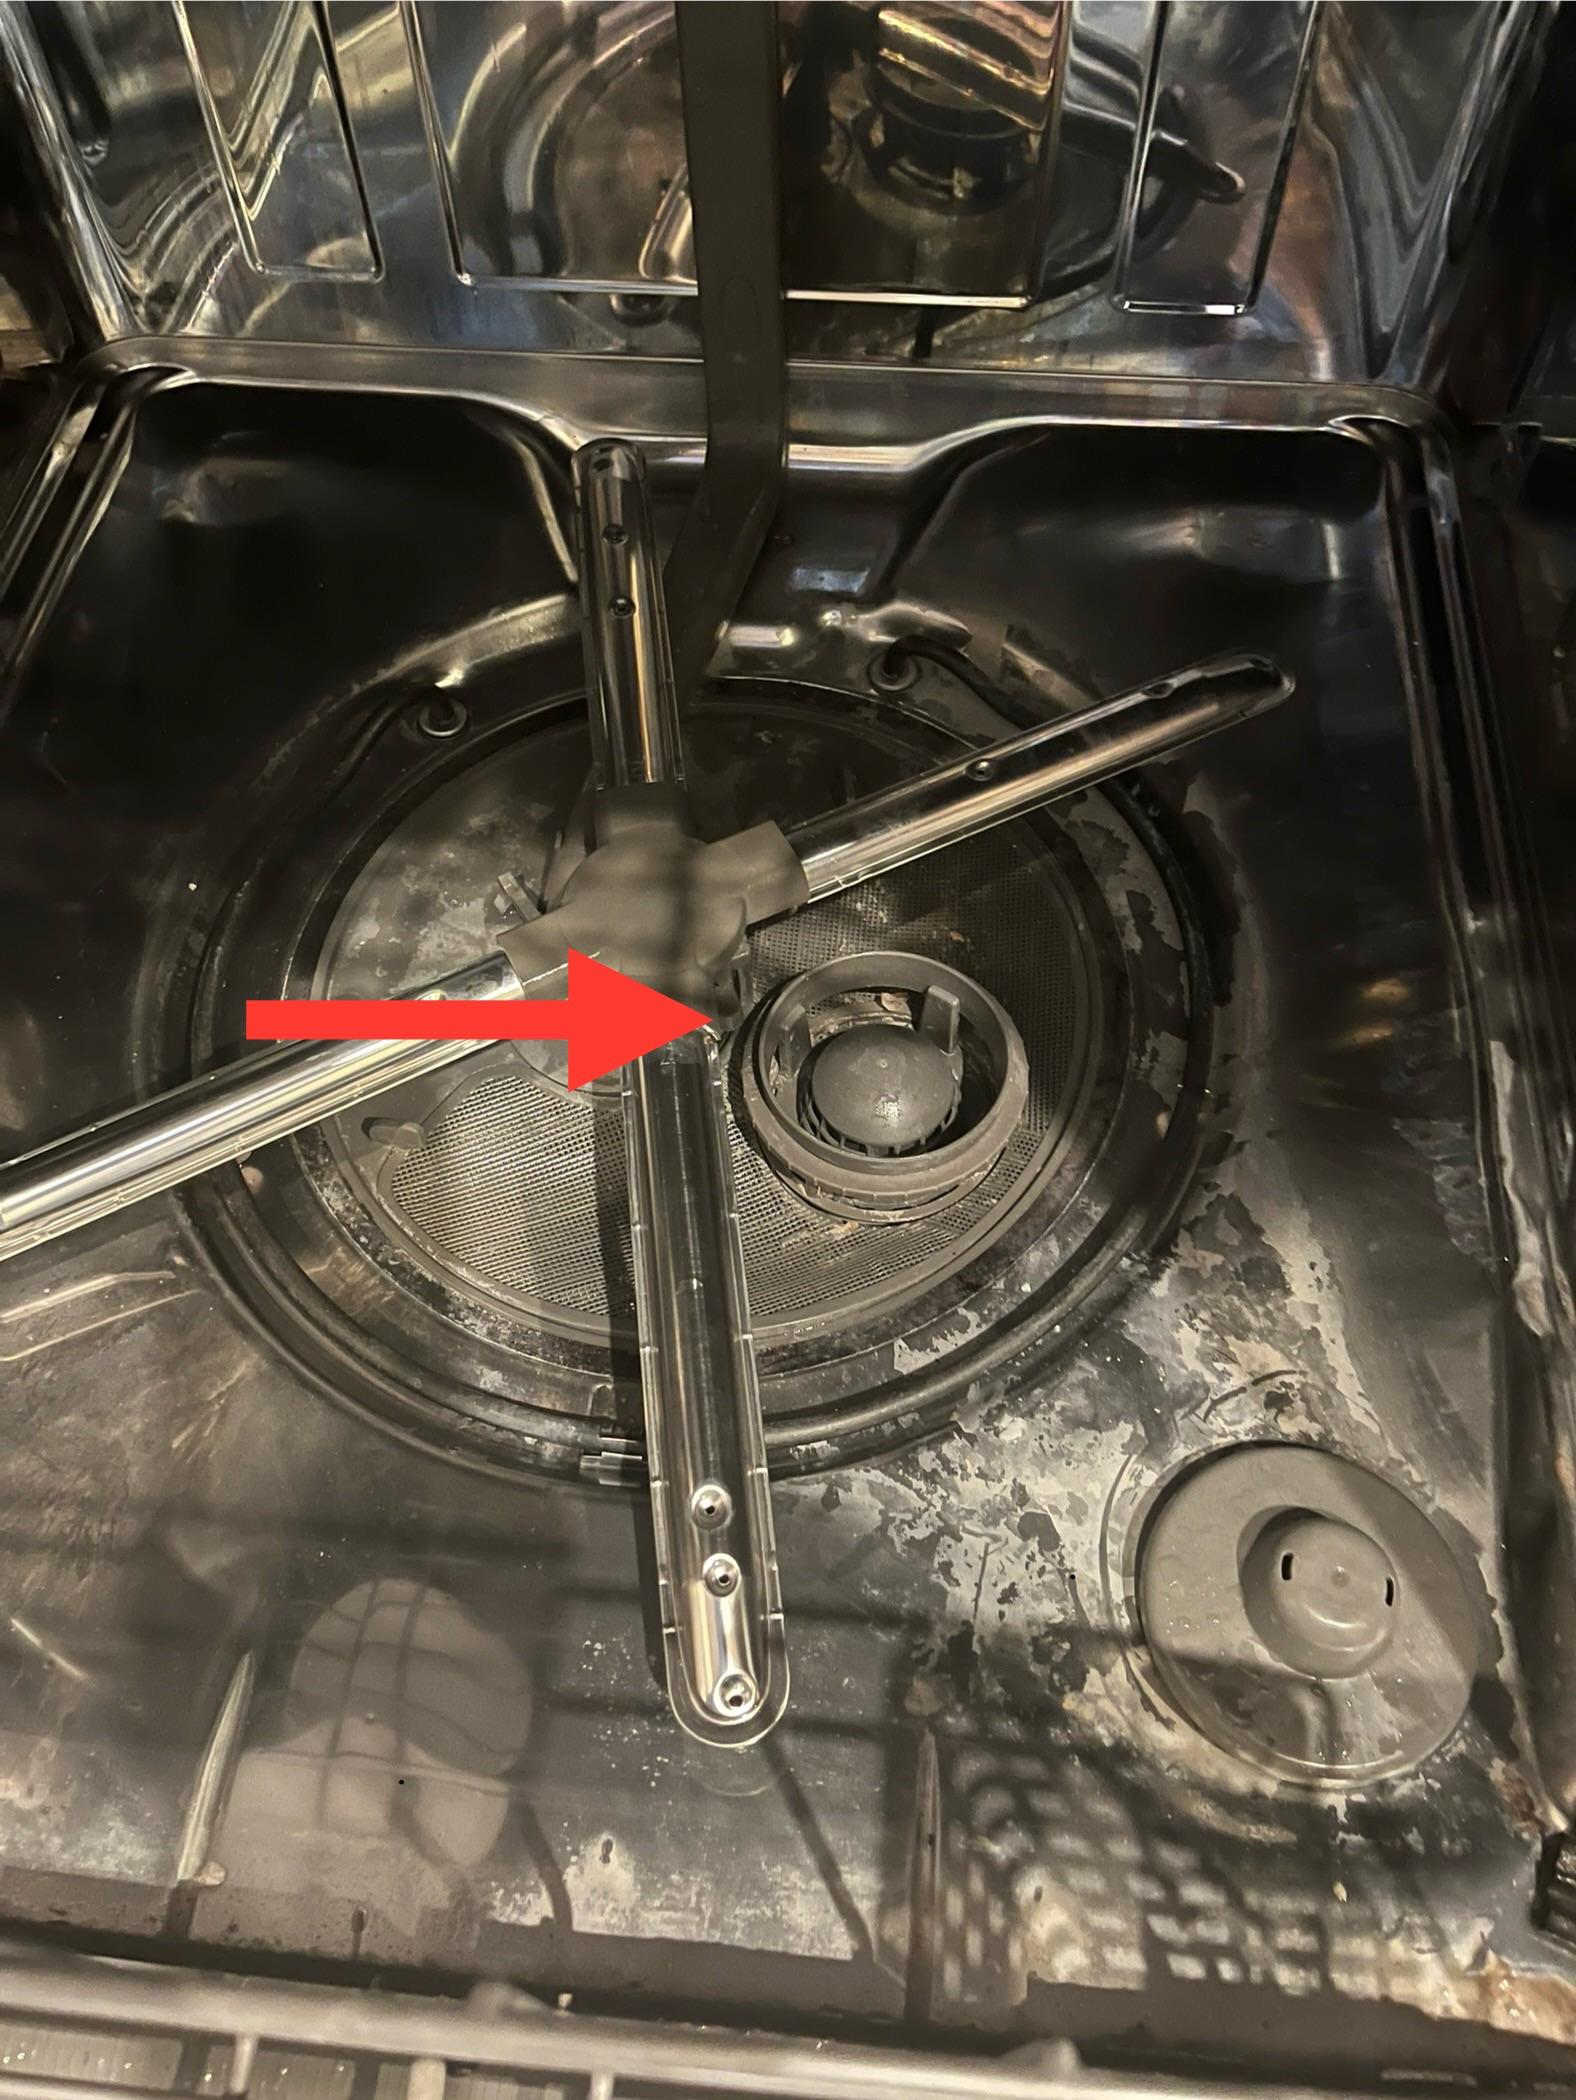 My in-laws dishwasher has the filter thing I have never had a dishwasher like this or seen one